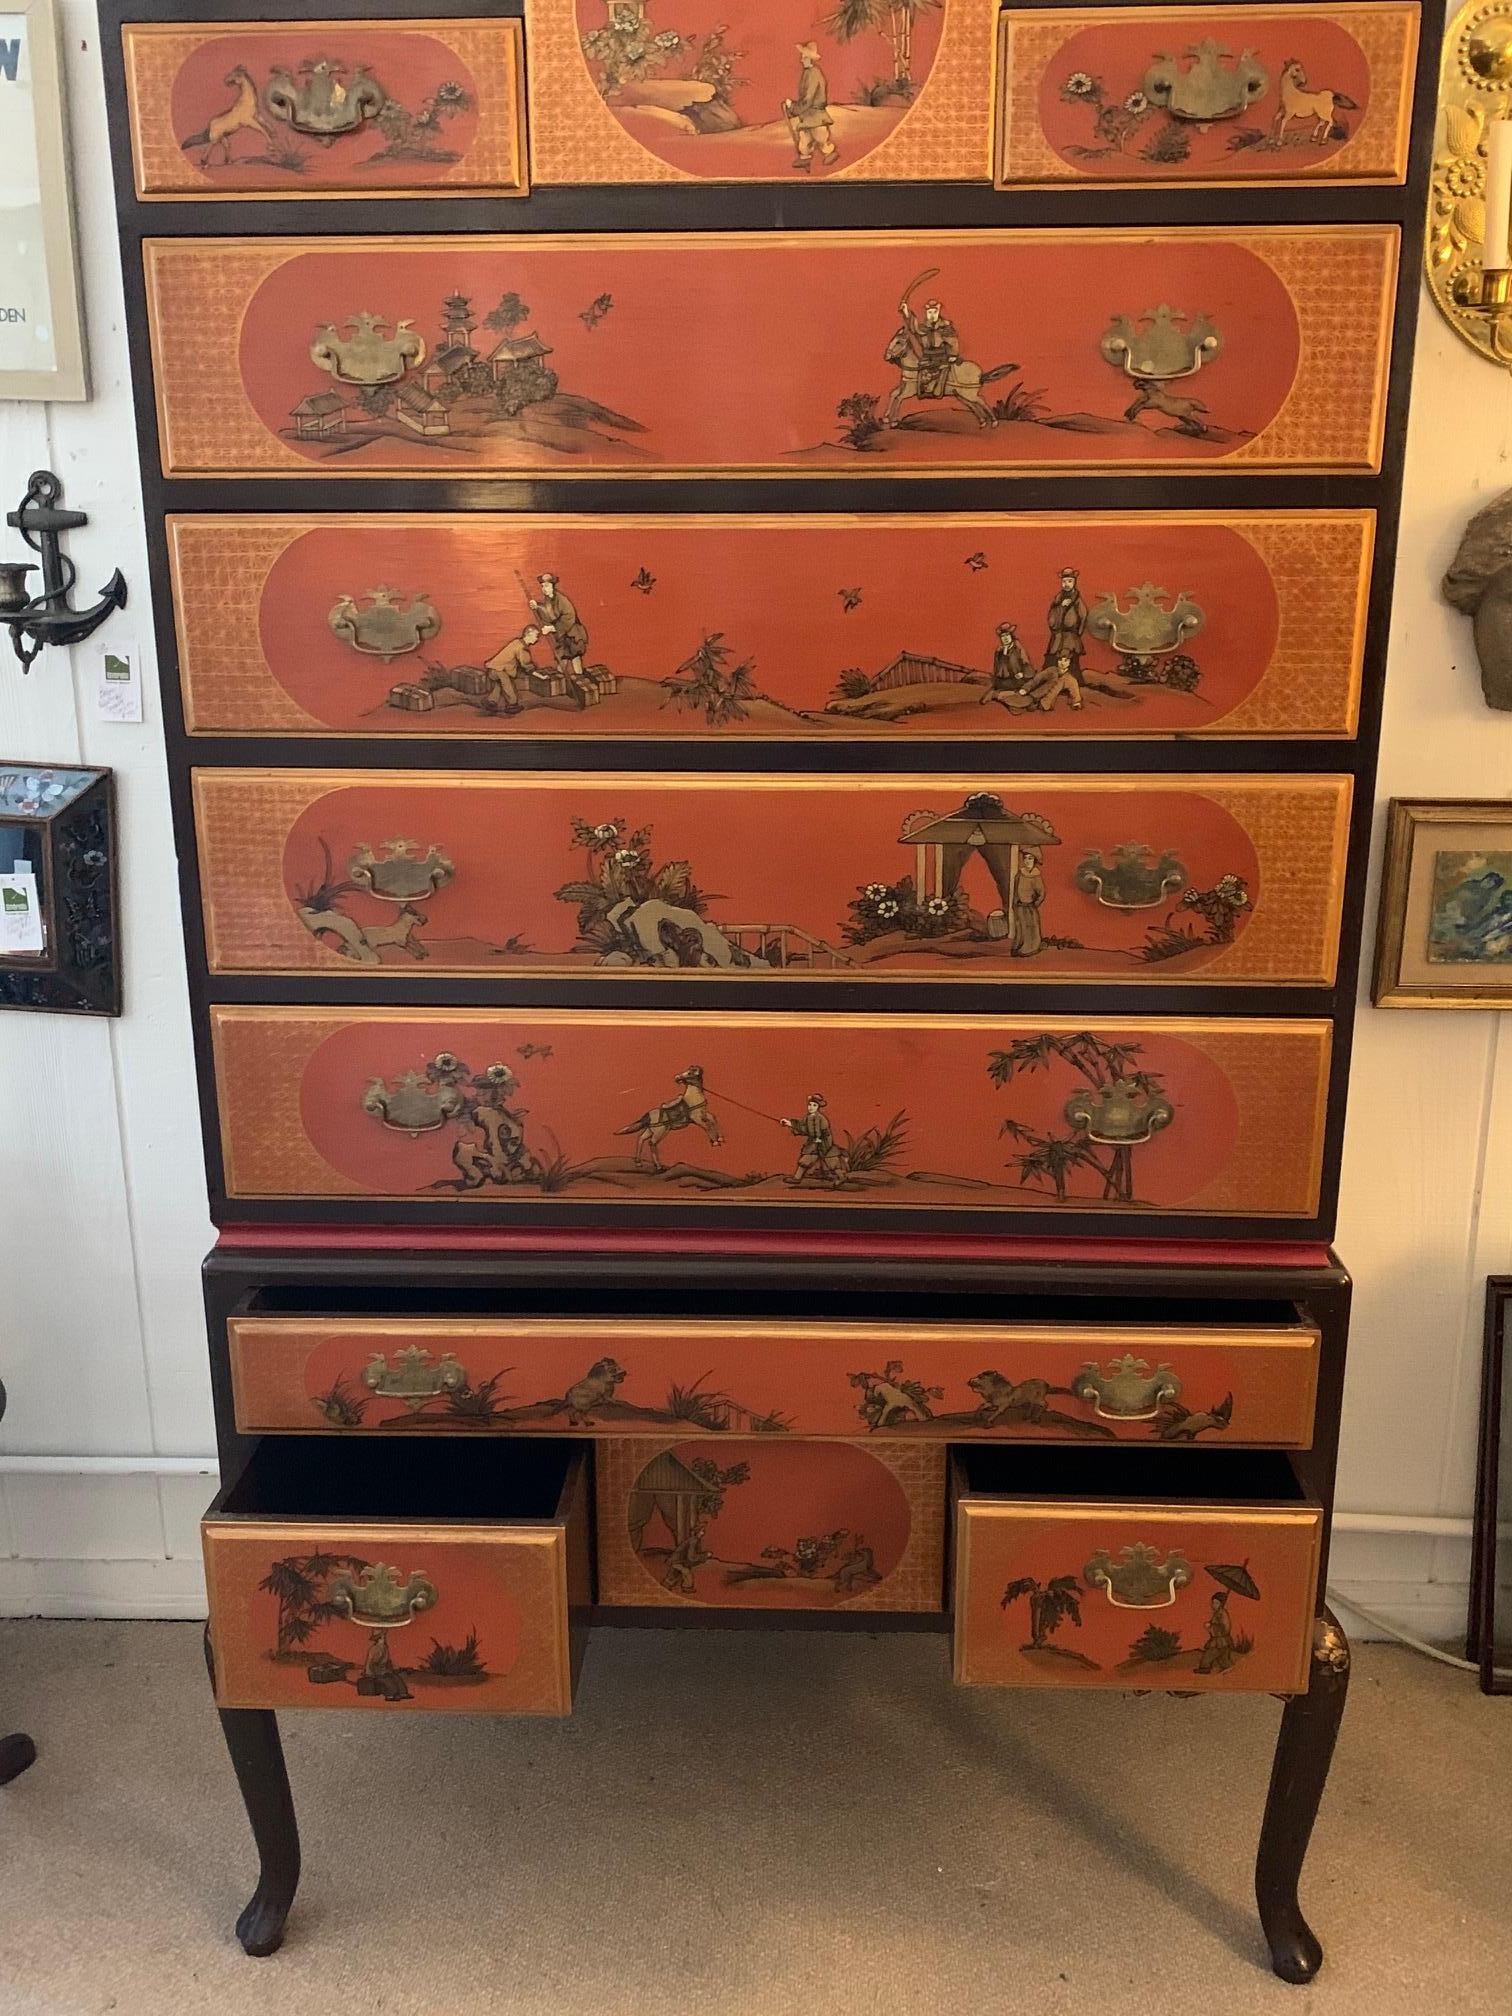 A show stopper magnificent chinoiserie 9 drawer highboy in a striking color palette of brown and two shades of warm orange. The hand painted embellishments are in black and gold leaf having raised figures, pagodas and bamboo with Chippendale style